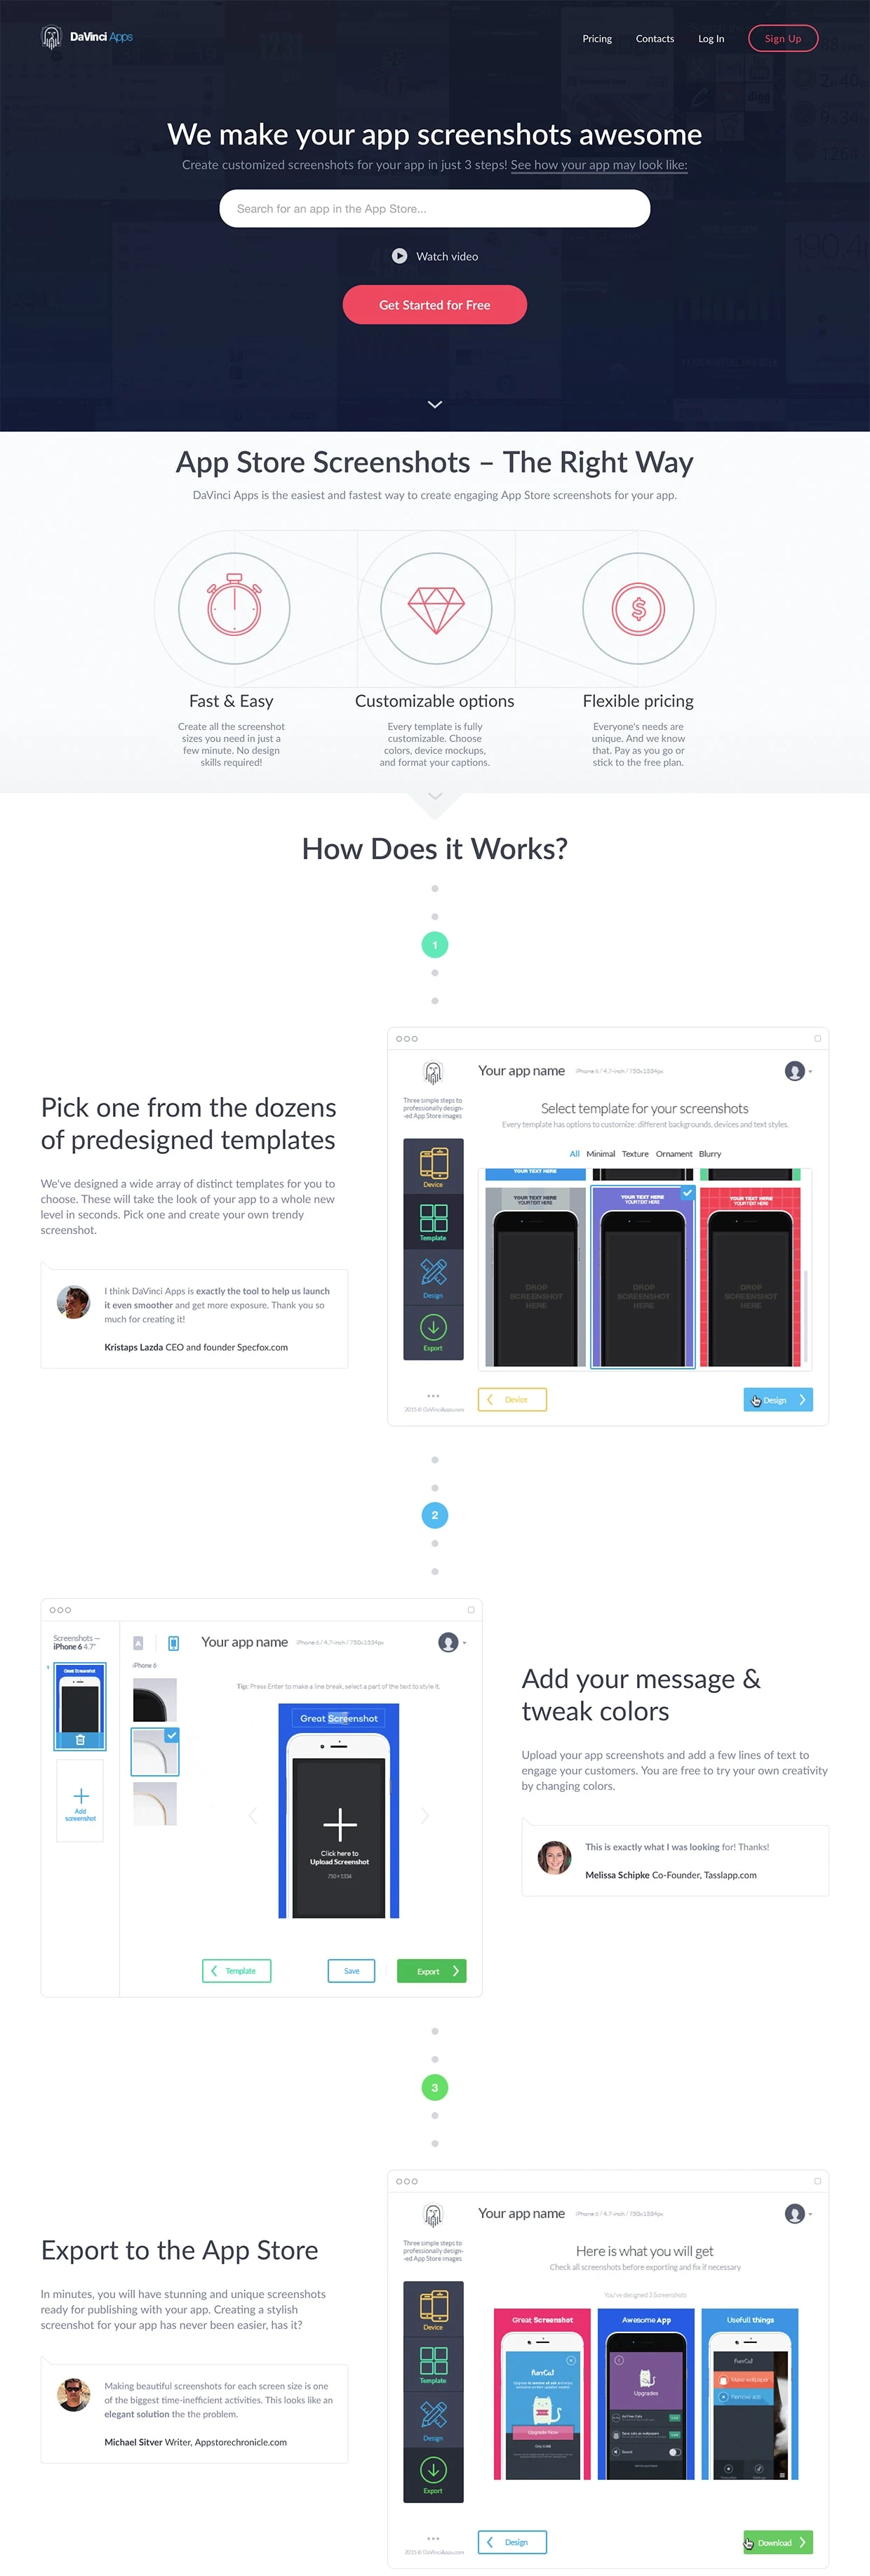 DaVinci Apps Landing Page Example: Pick one of predesigned screenshot templates, add your message, tweak the colors and get app screenshots of ALL required App Store sizes with a click